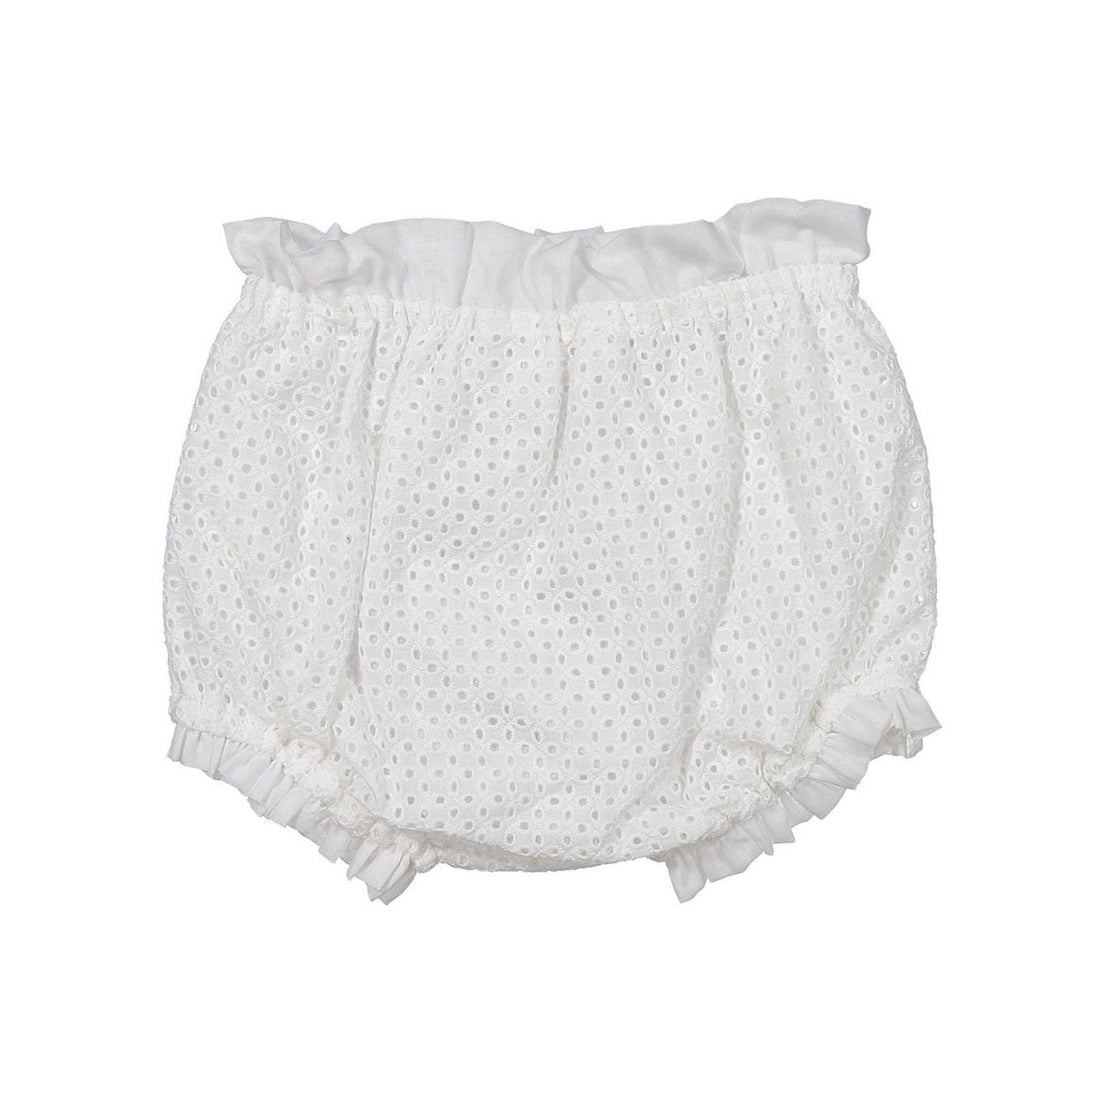 You and Me bottoms You and Me White Eyelet Bloomers